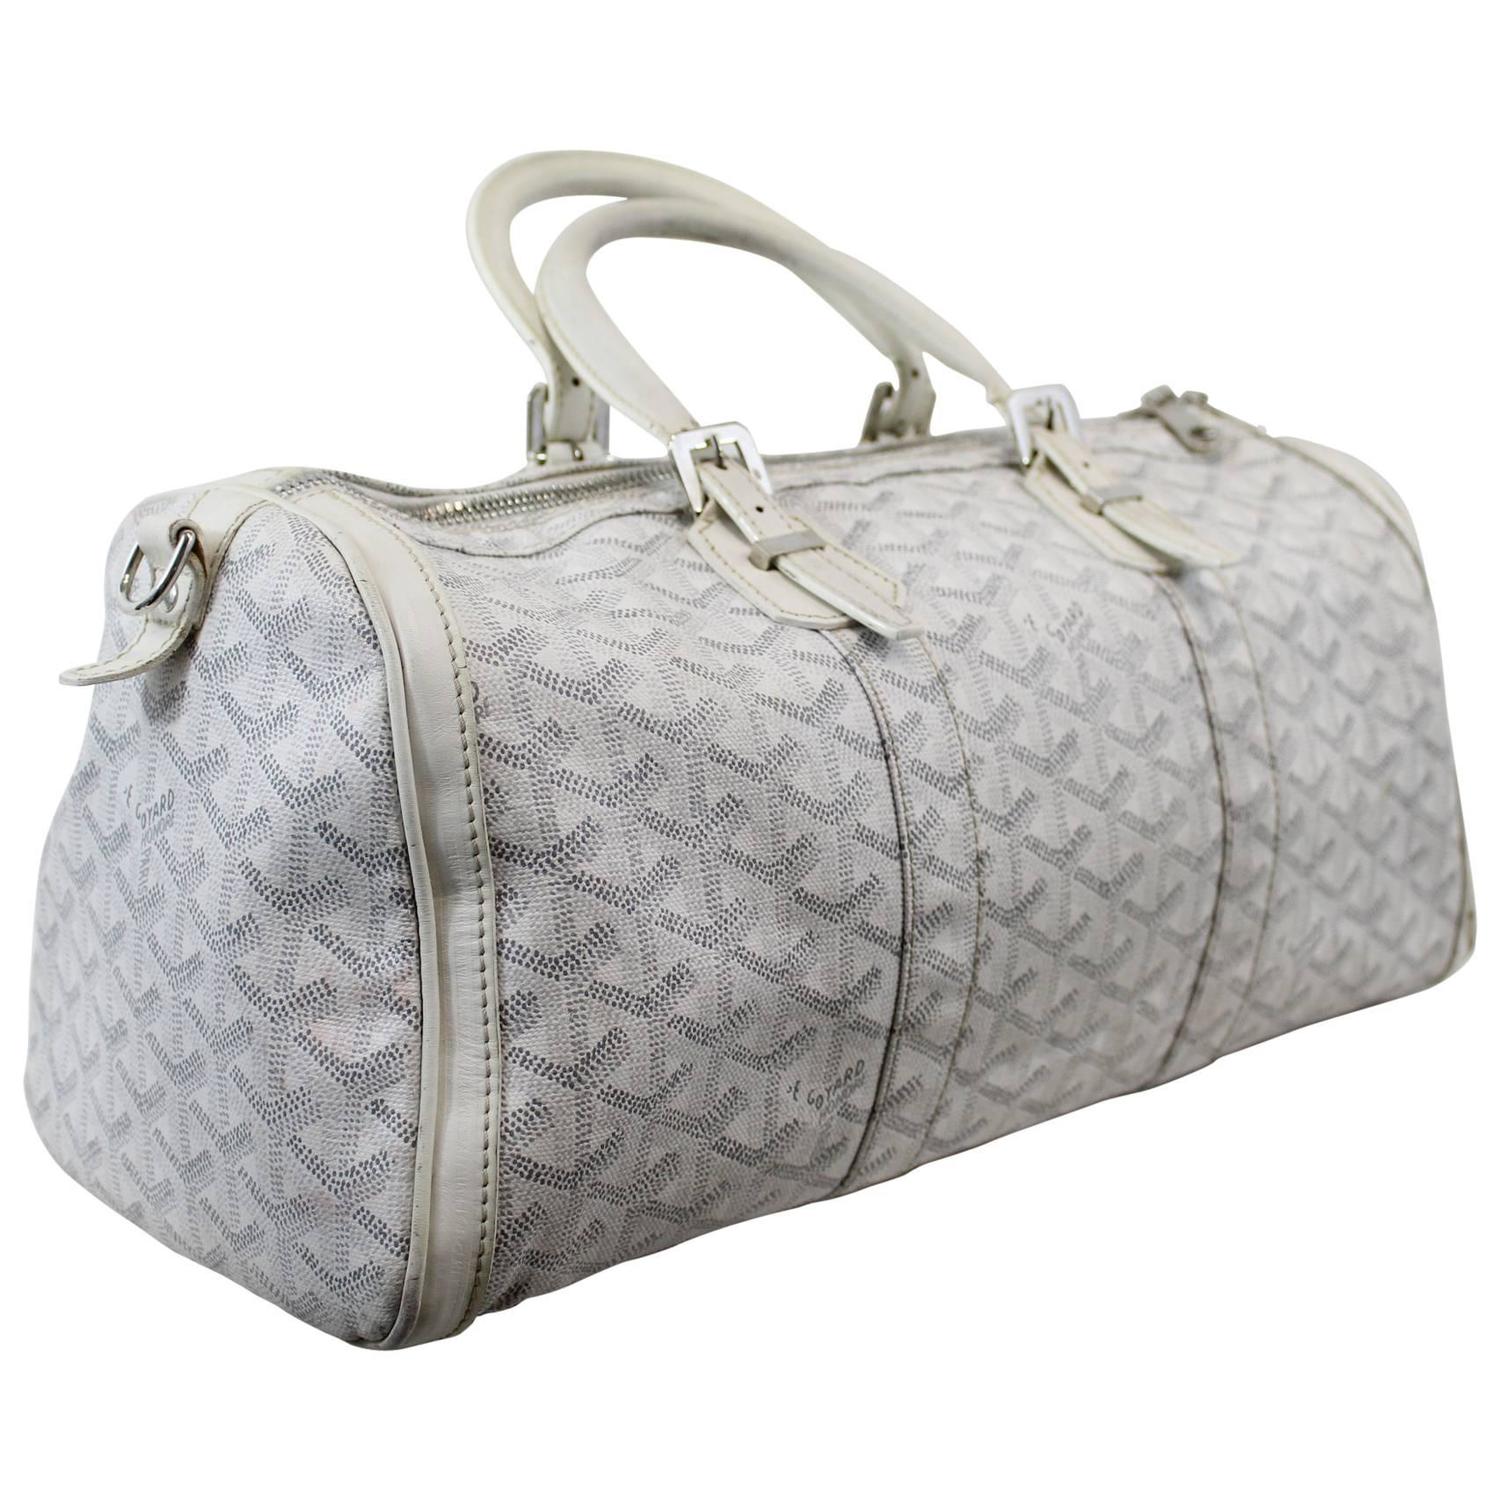 Goyard Small Croissiere White Bag. For Sale at 1stdibs